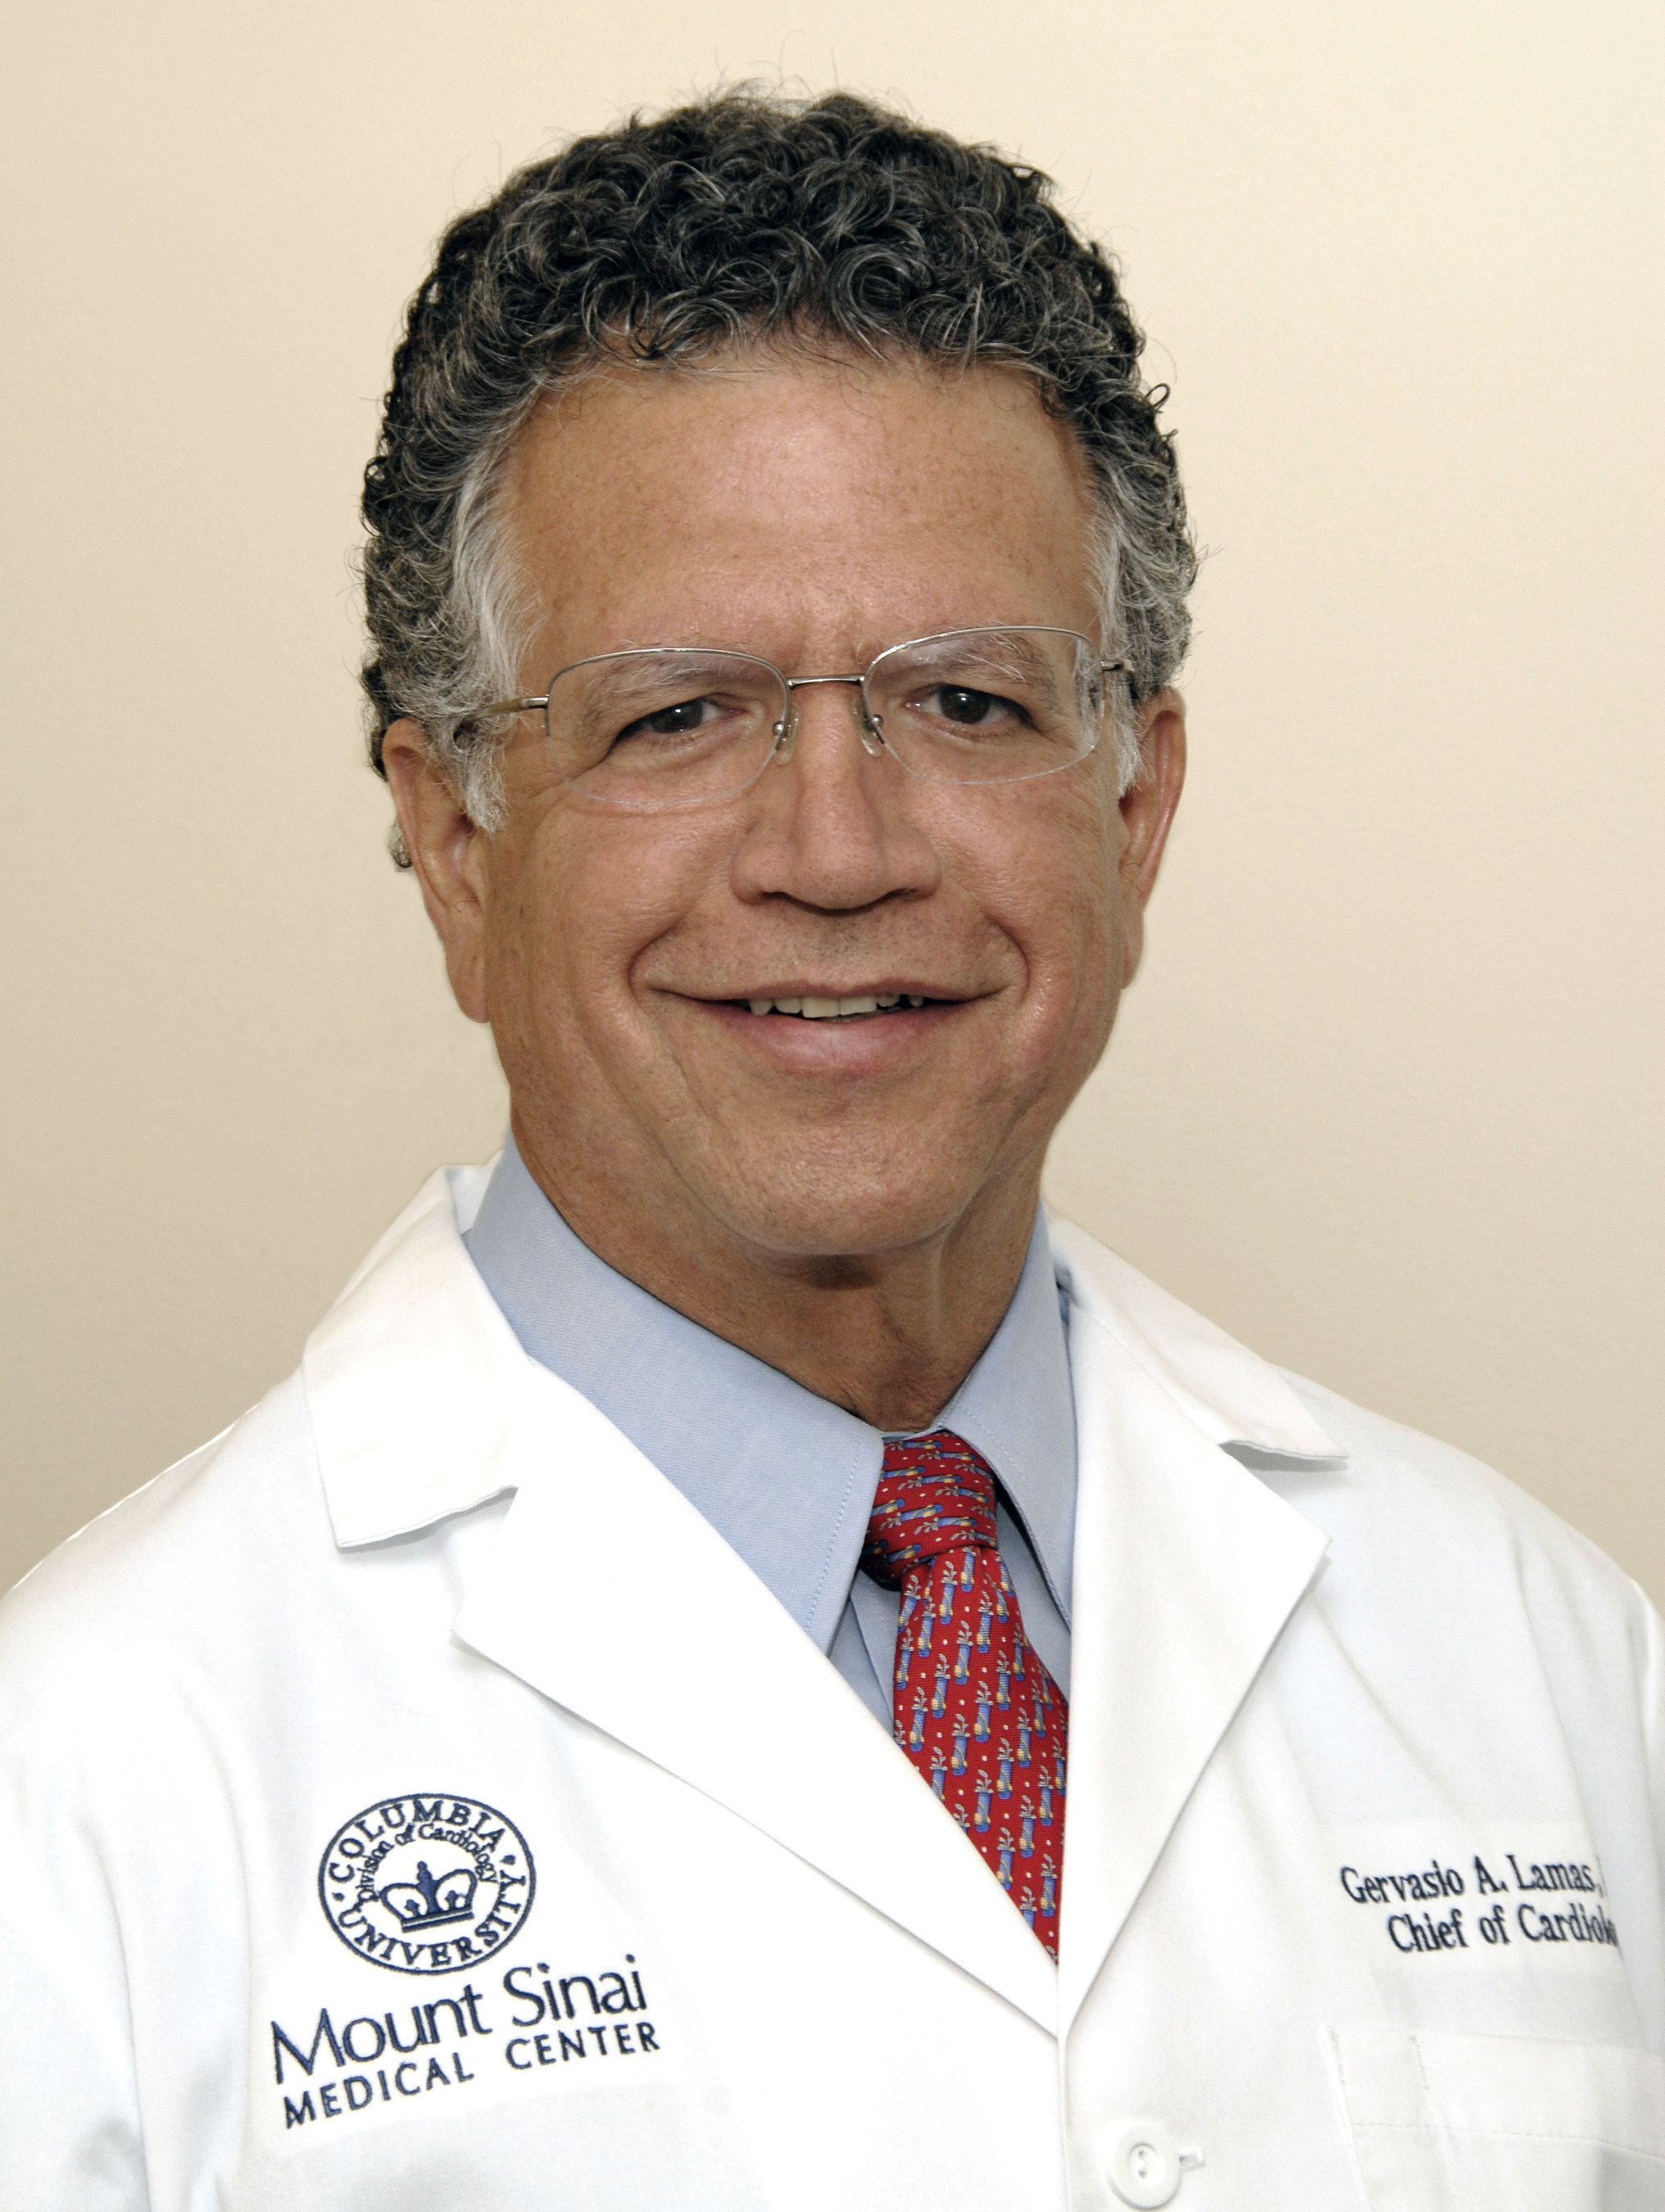 Dr. Gervasio Lamas, chairman of medicine and Chief of the Columbia University Division of Cardiology at Mount Sinai Medical Center of Florida is the study chairman for the second Trial to Assess Chelation Therapy (TACT2), which will measure the effects of chelation therapy coupled with oral vitamins on patients with diabetes.